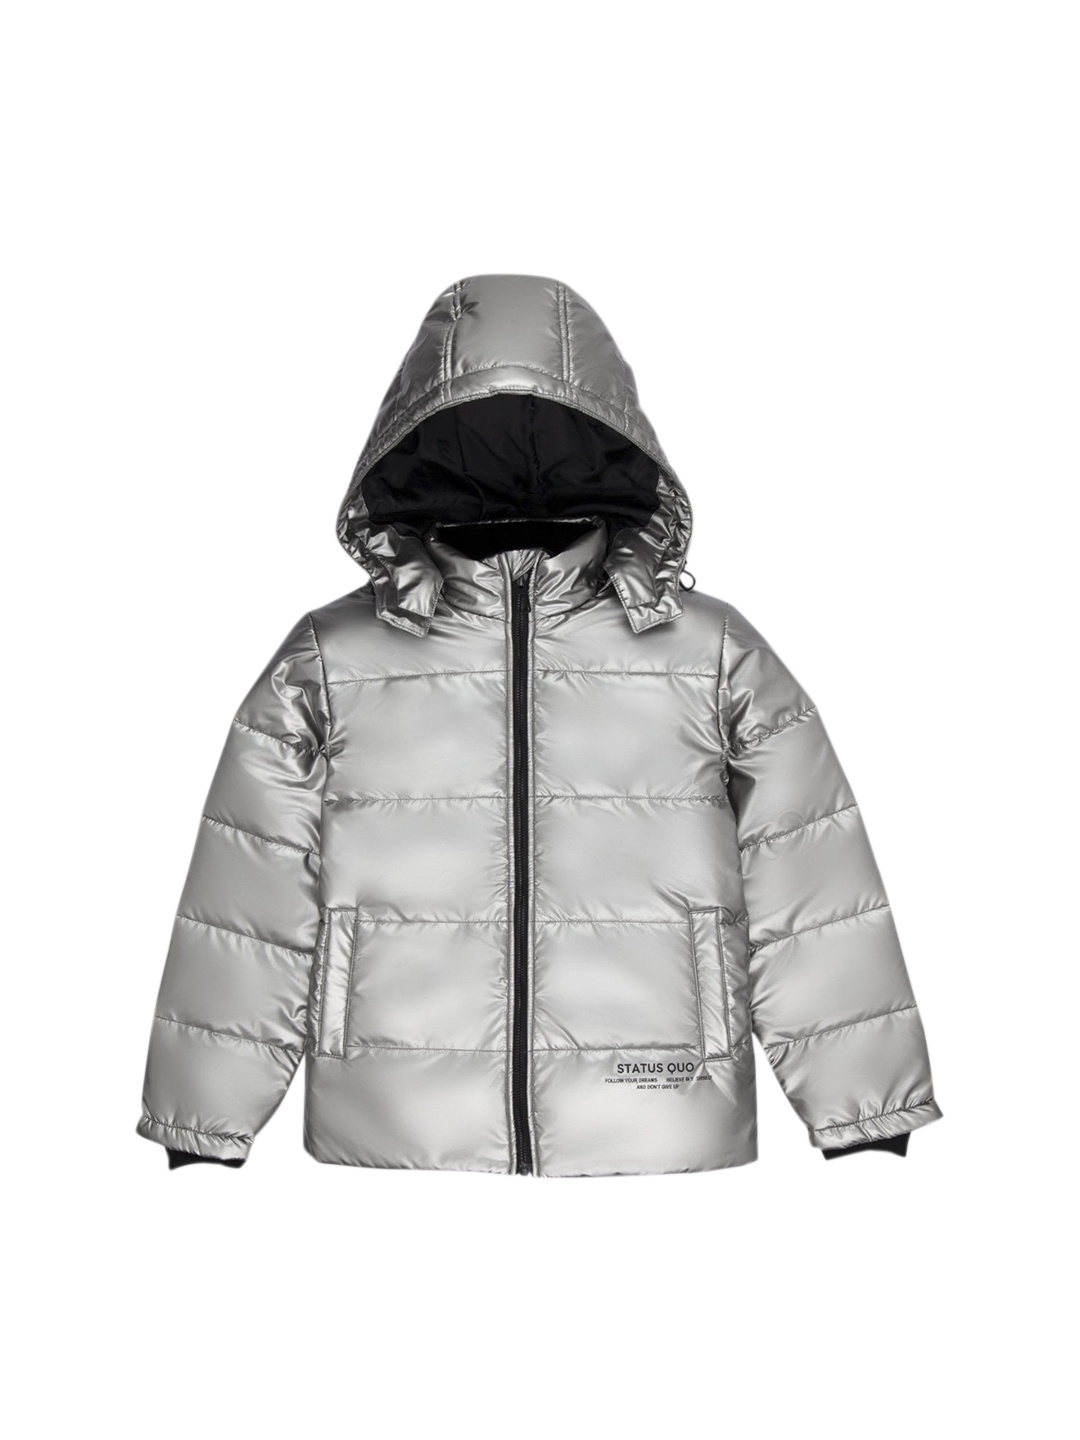 Status Quo Boys Silver-Toned Hooded Puffer Jacket - buy at the price of ...